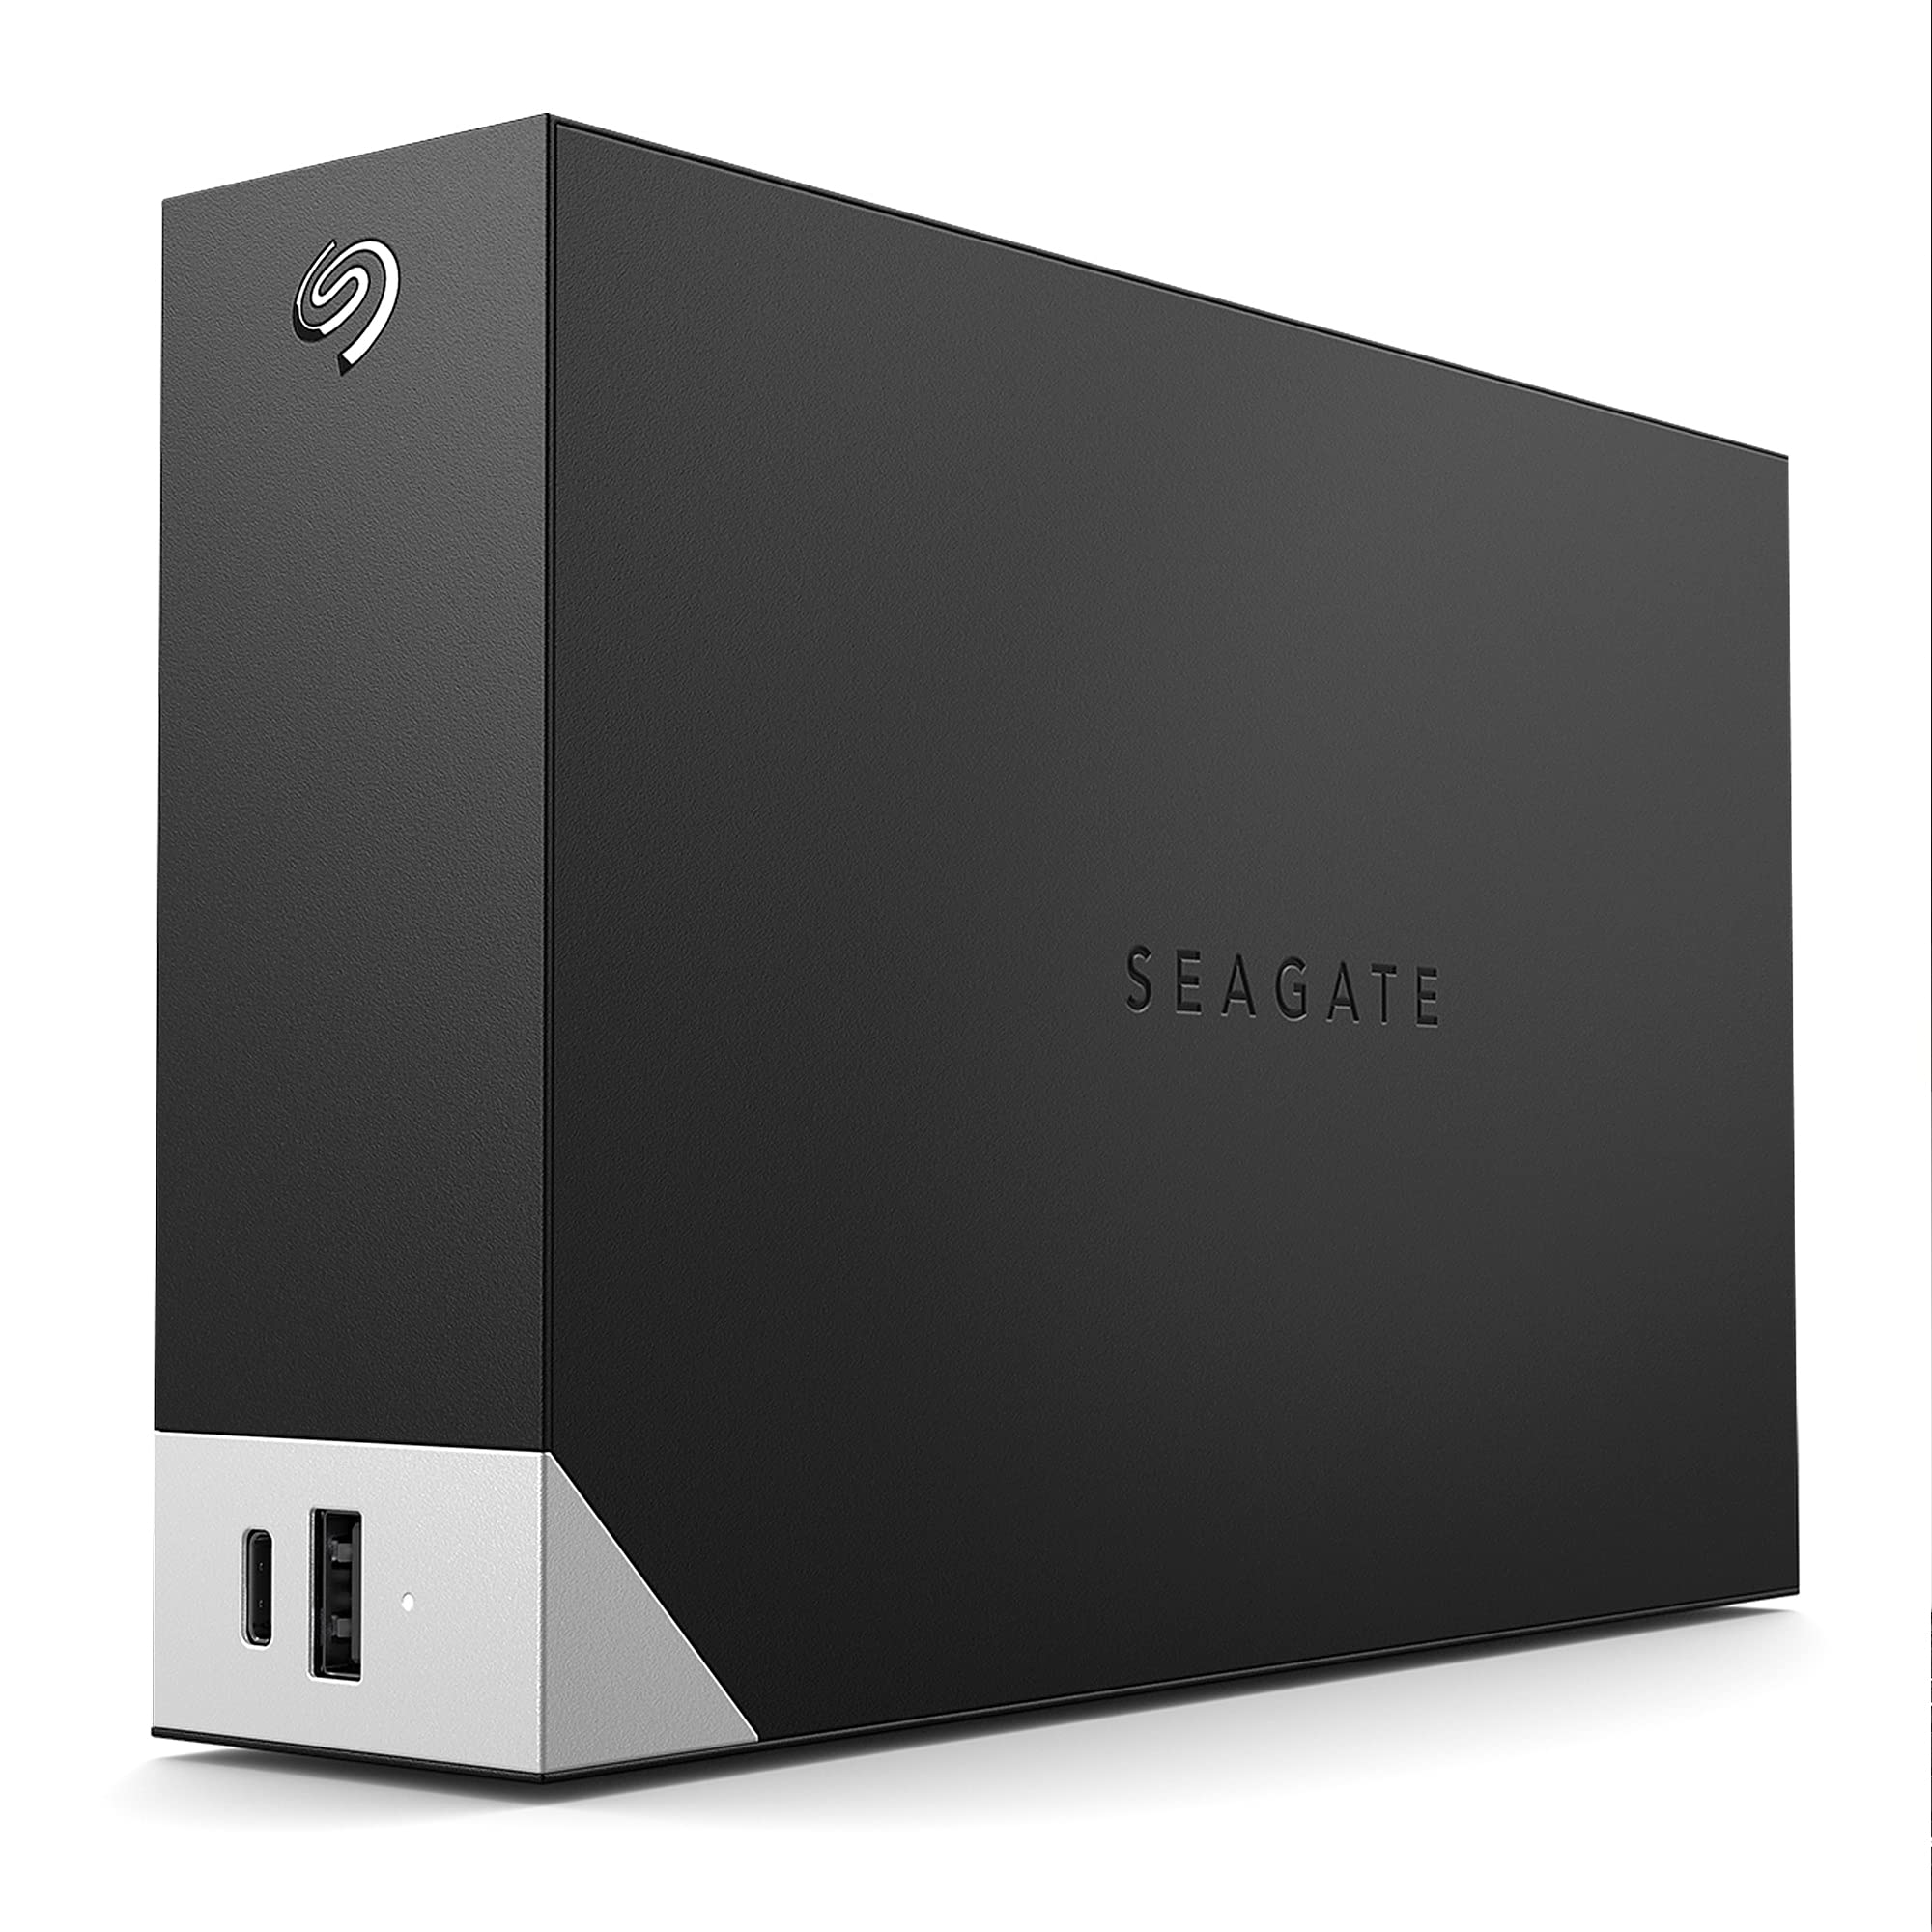 Seagate One Touch Hub 20TB External Hard Drive Desktop HDD USB-C and USB 3.0 port for Computer Workstation PC Laptop Mac